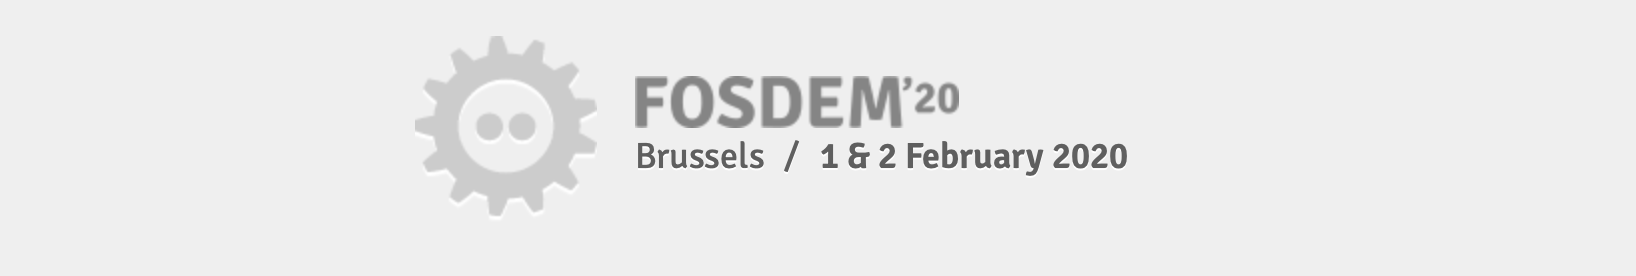 draw.io is sponsoring the FOSDEM'20 conference for open source developers